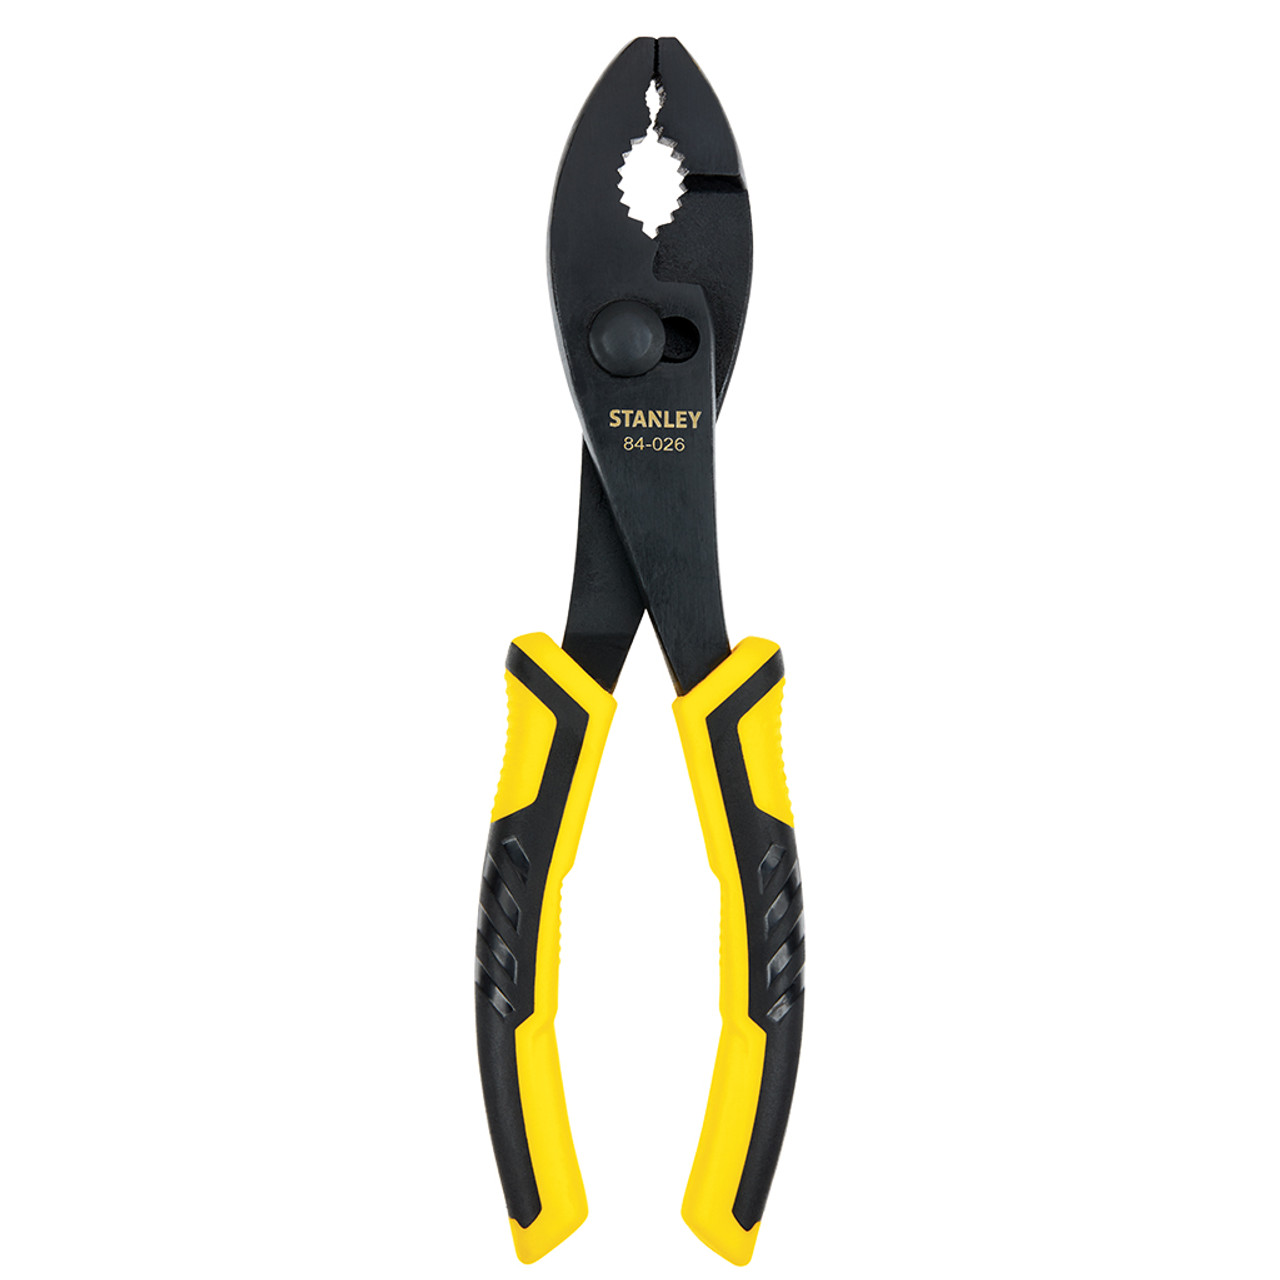 Stanley Bi-Material Slip Joint Pliers, 8 - Midwest Technology Products